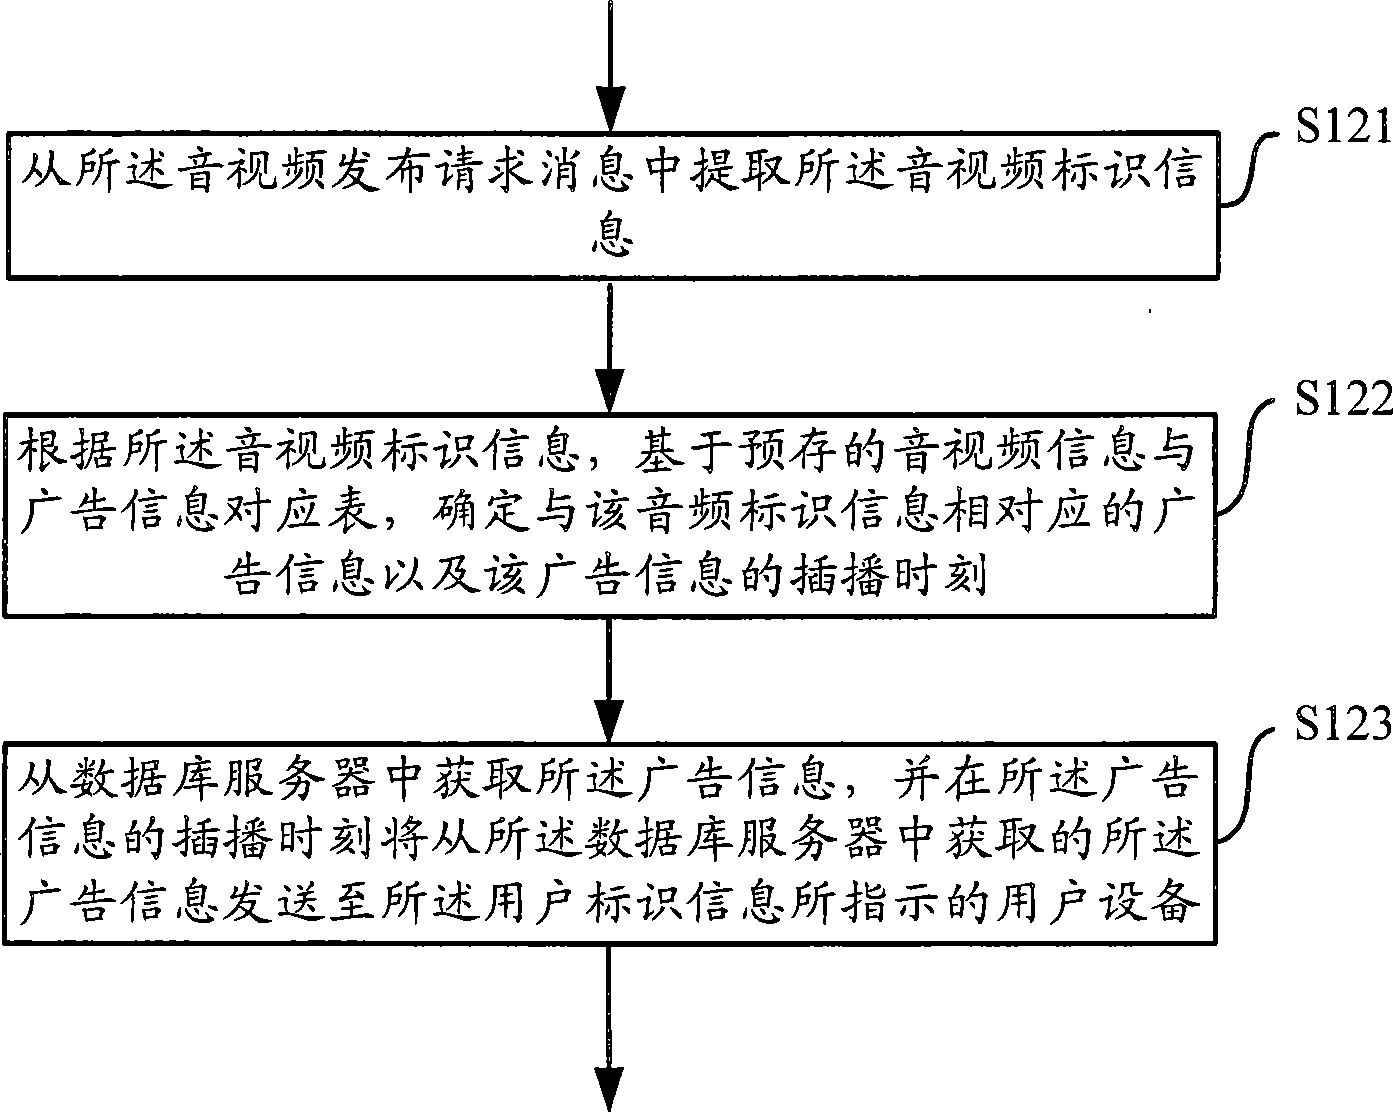 Method and device for inserted playing of advertisement information when playing multimedia file on customer equipment